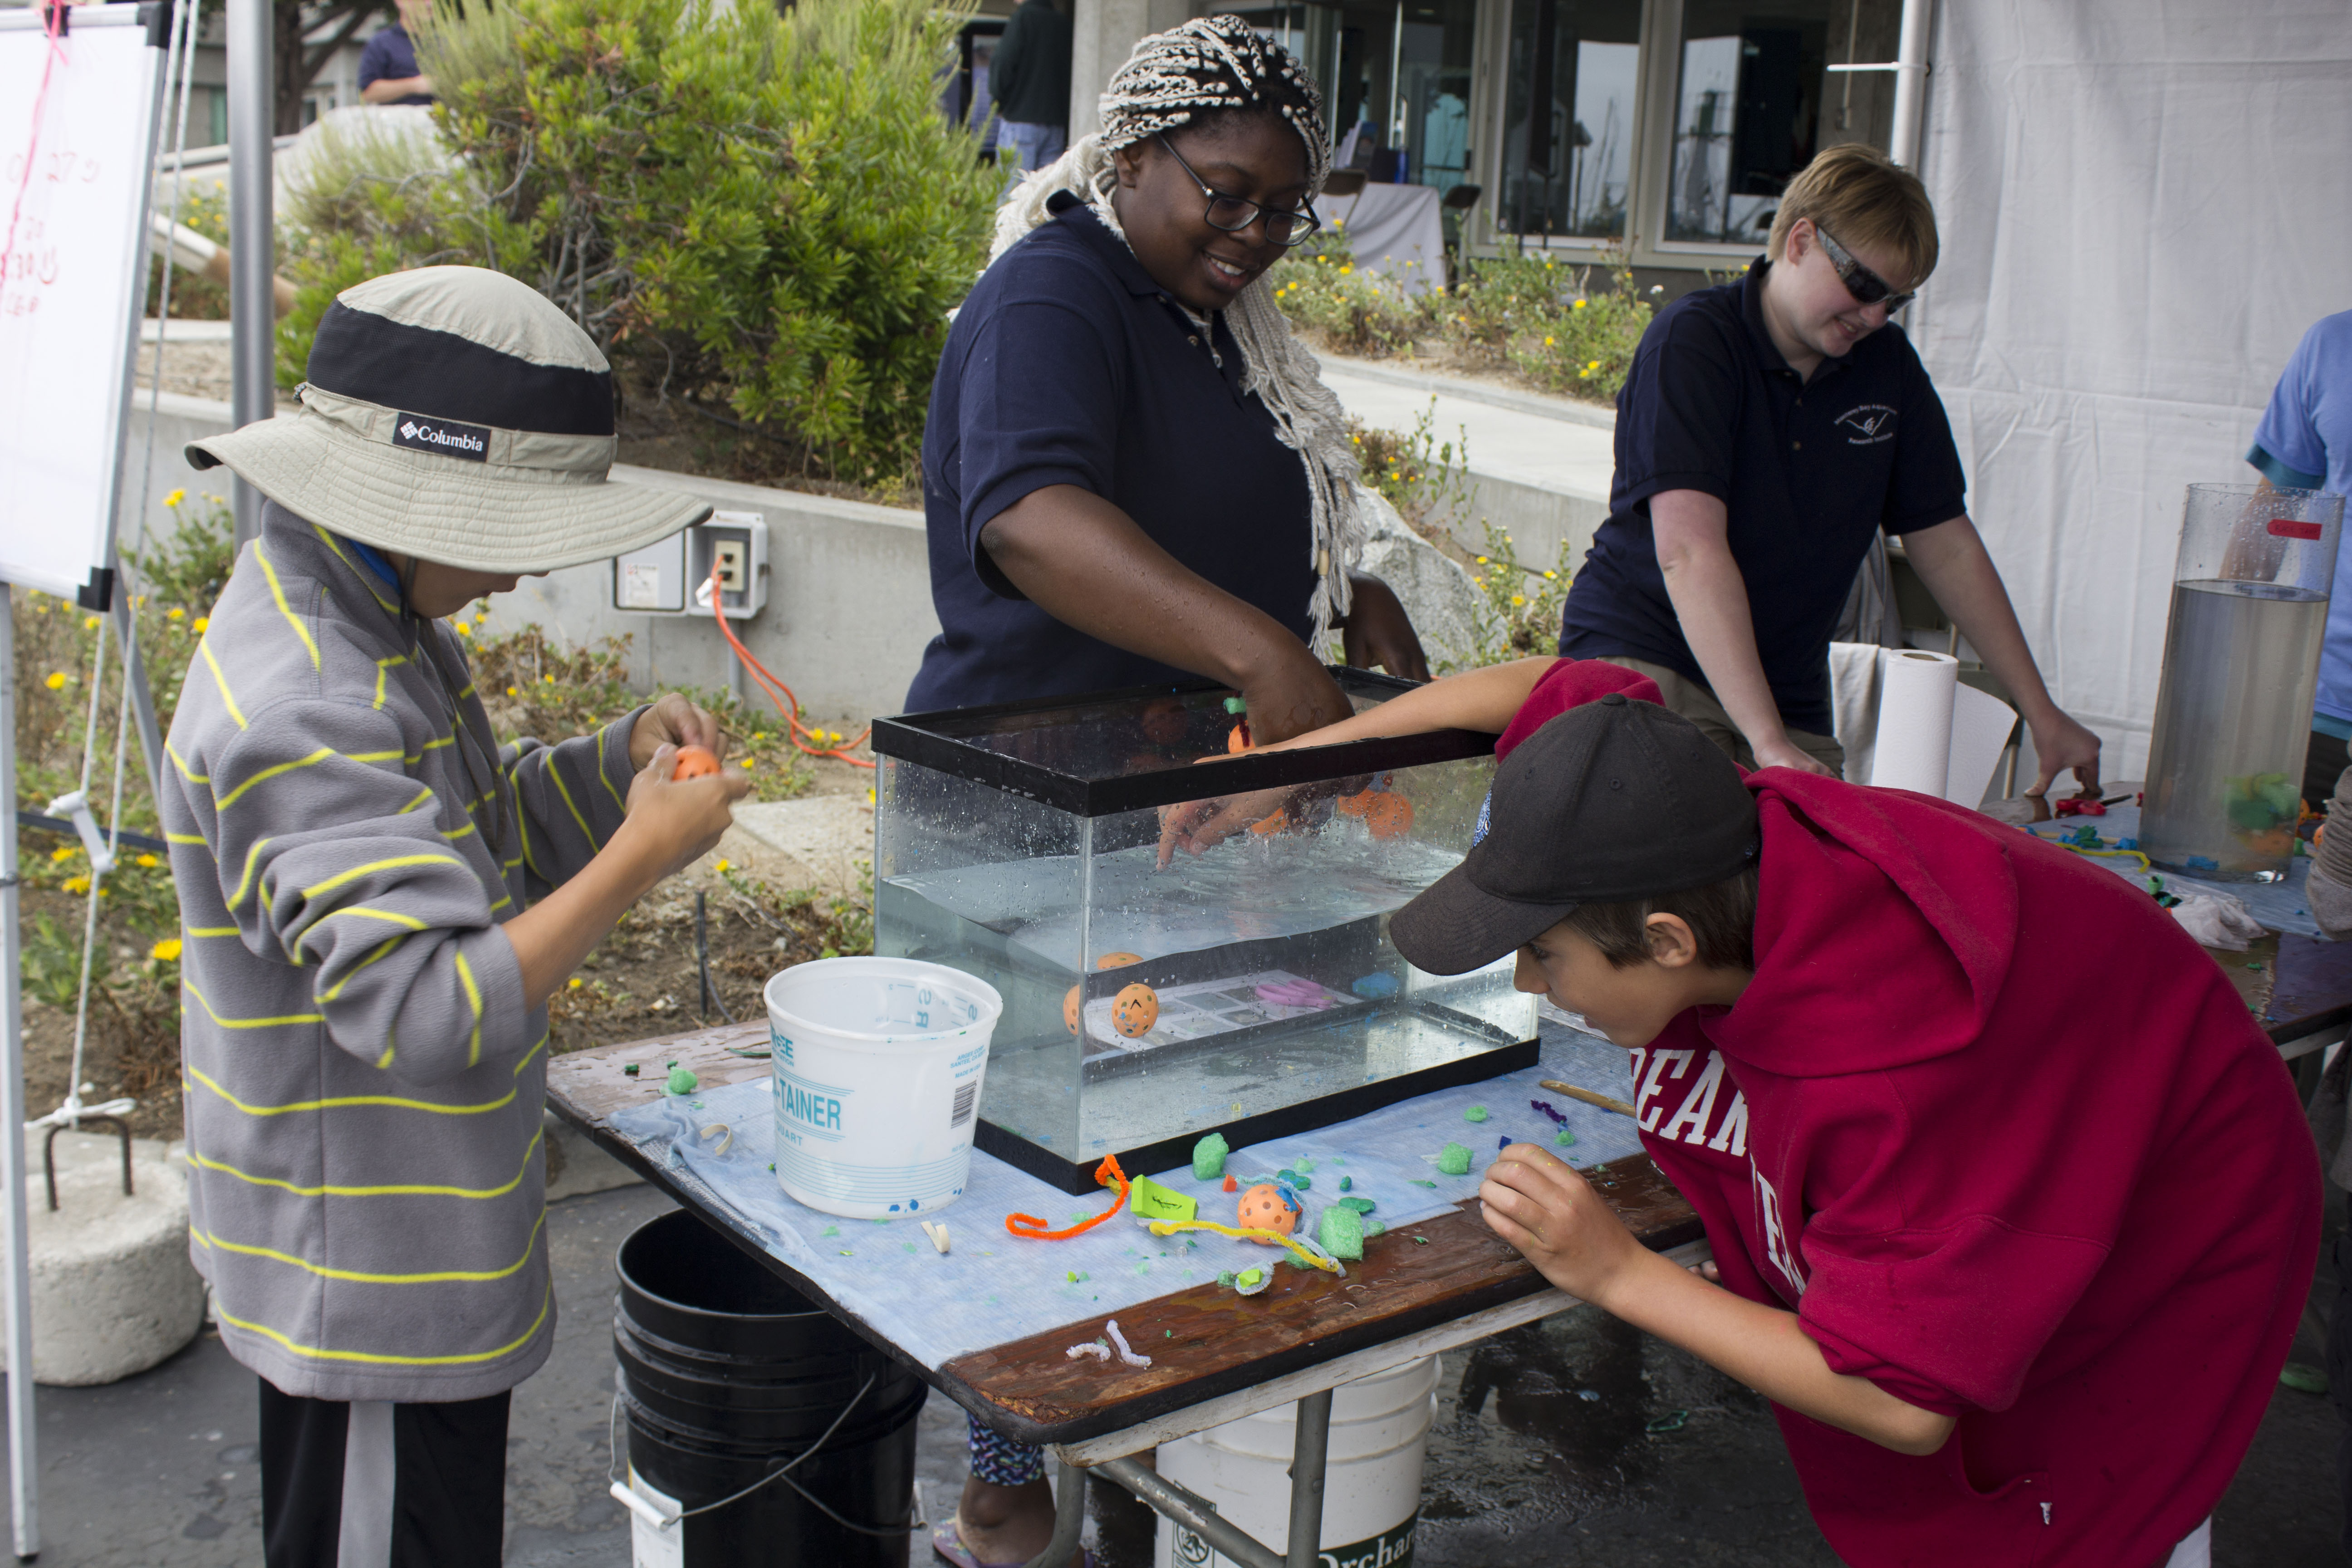 MBARI Open House attracts visitors interested in ocean science and